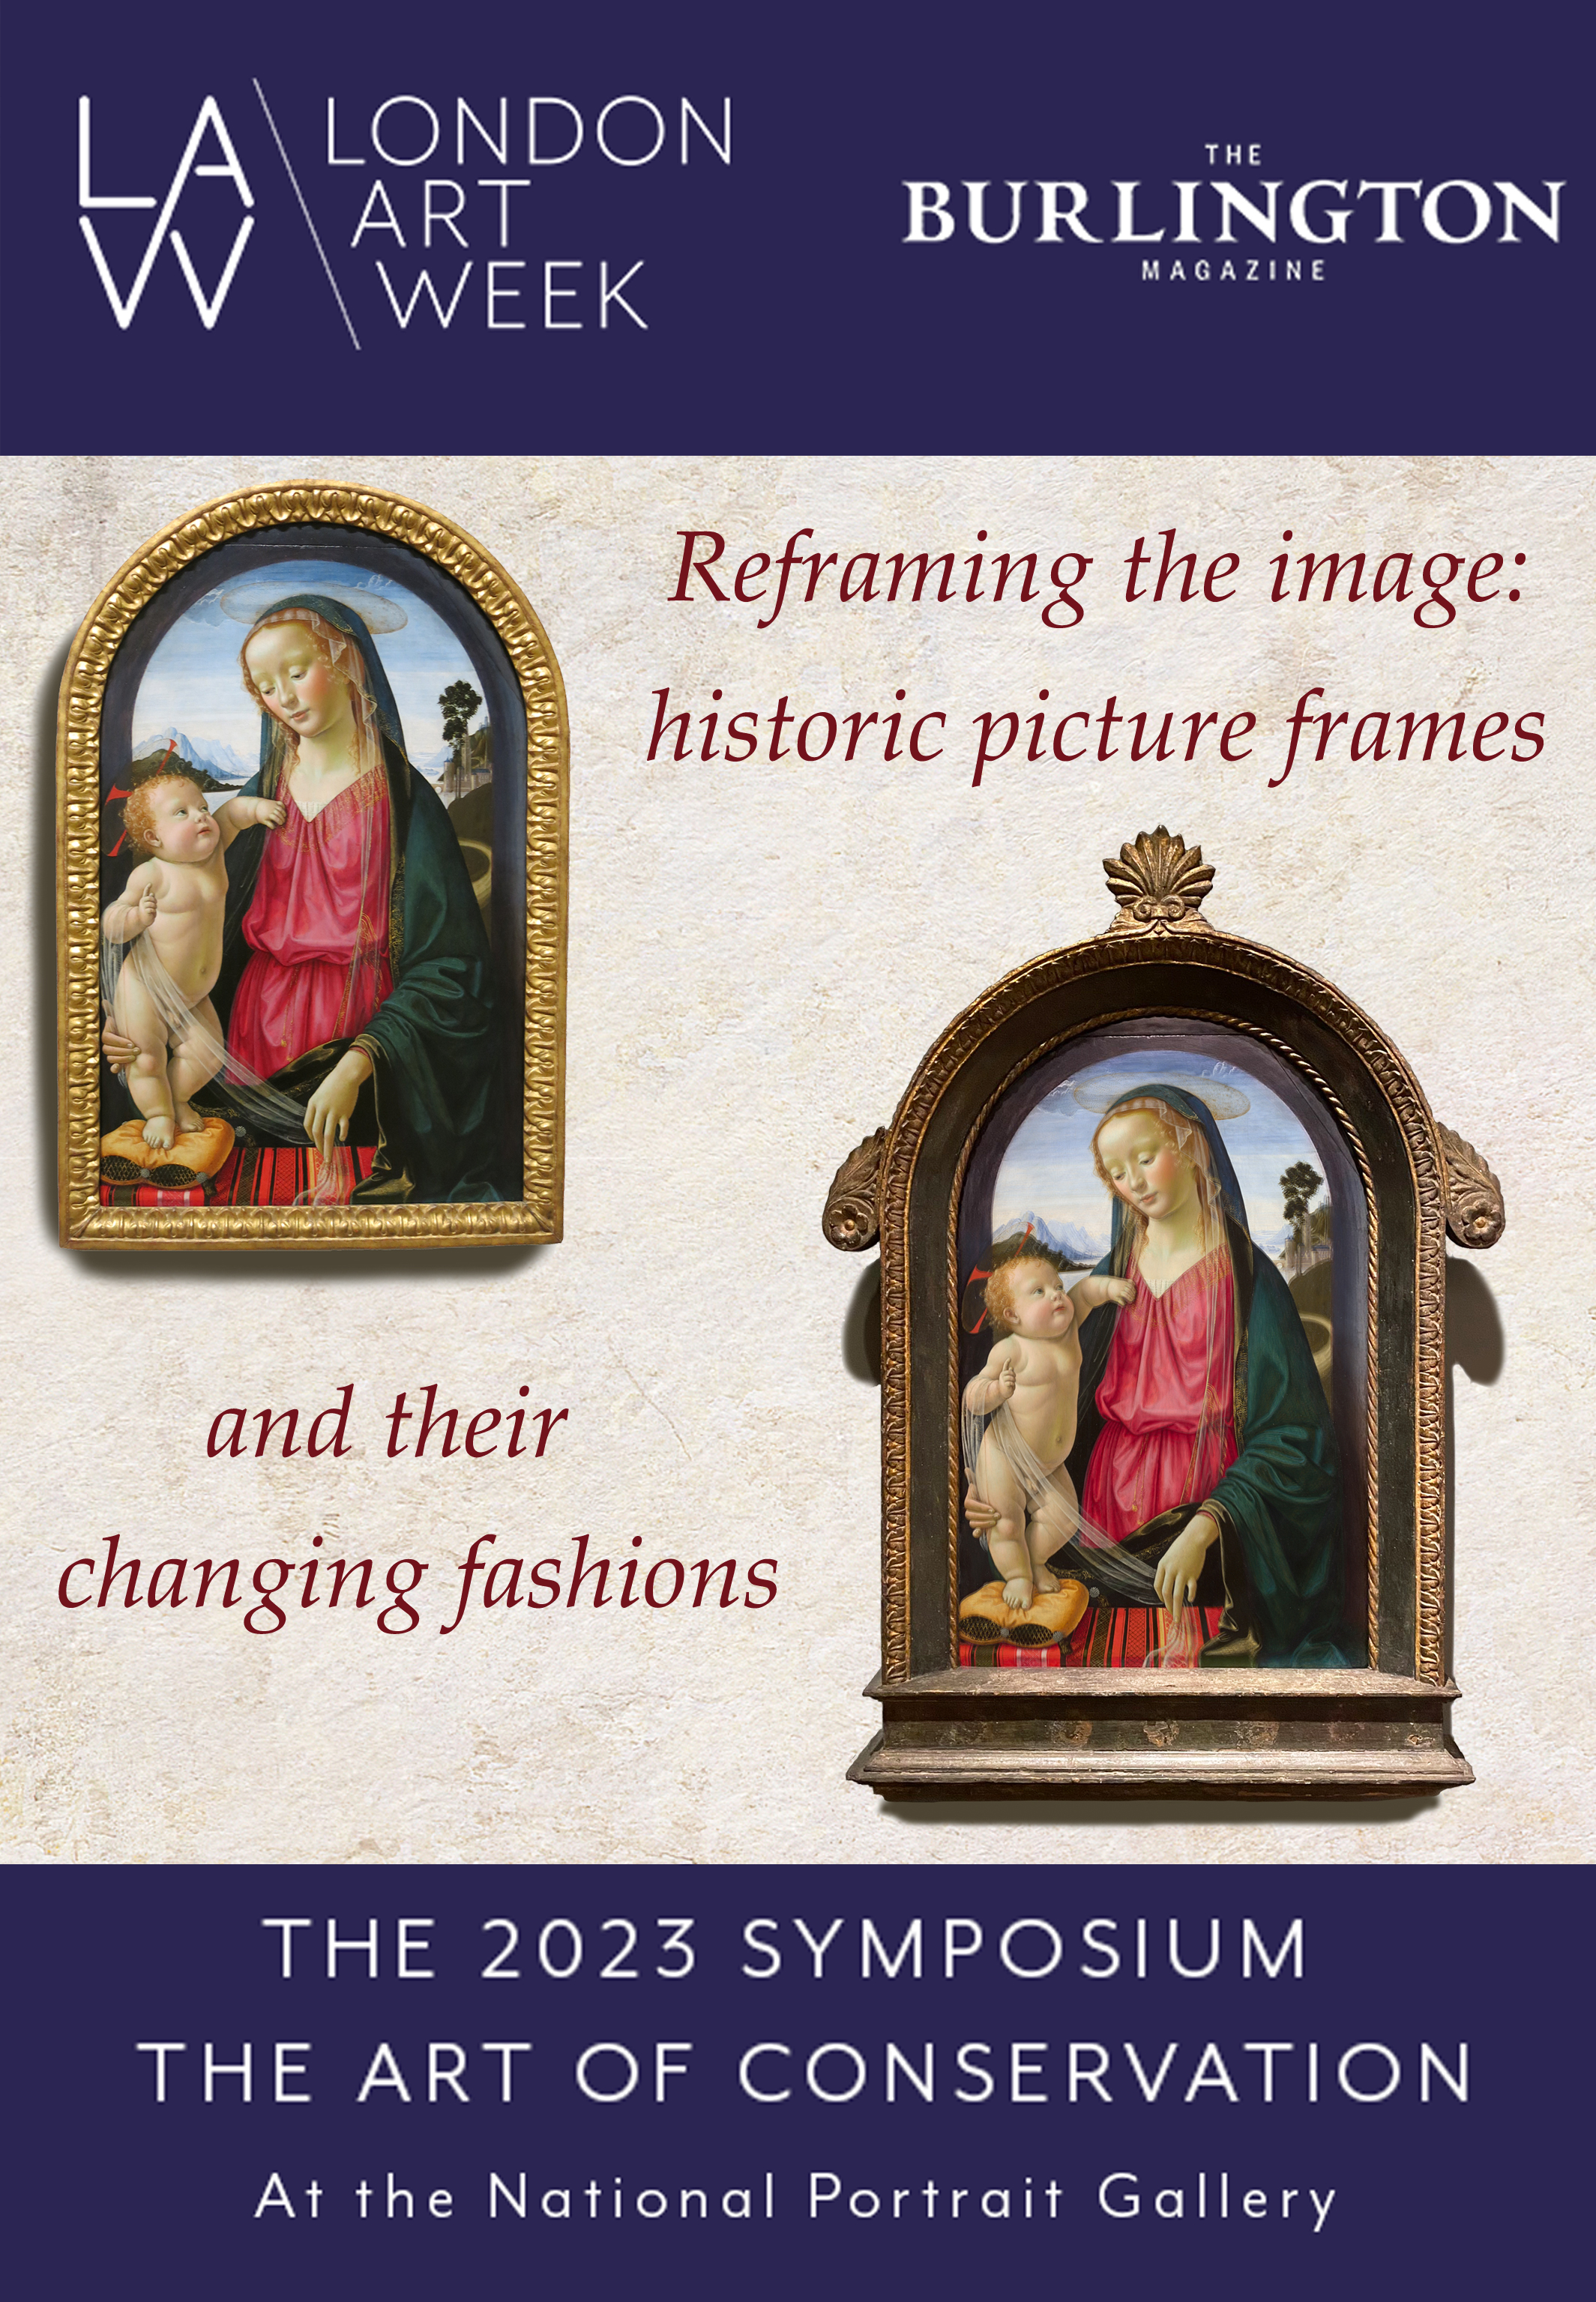 Reframing the Image: Historic picture frames & their changing fashions
– a video